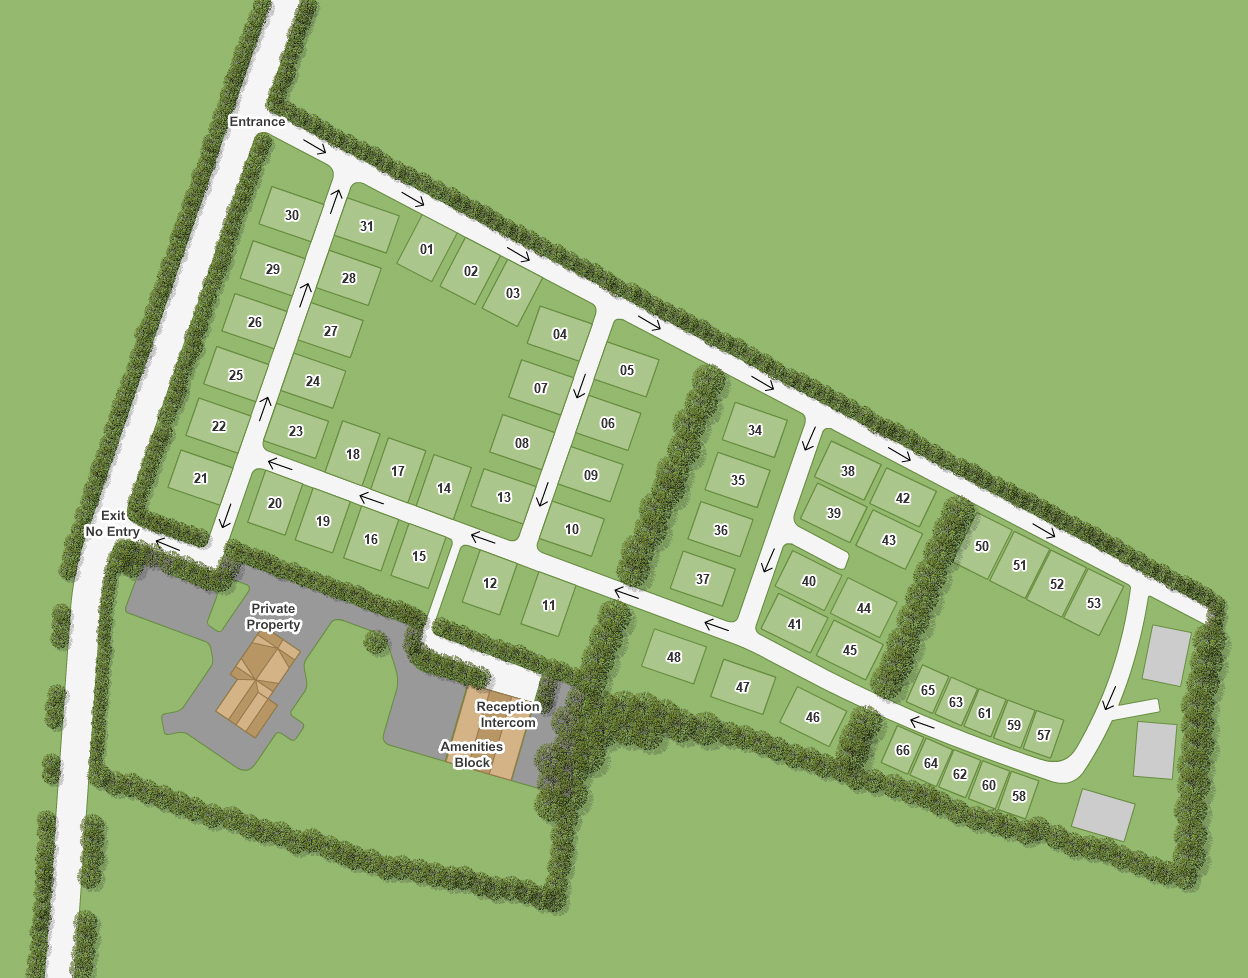 site-map-with-road-directions-new-pitches.jpg